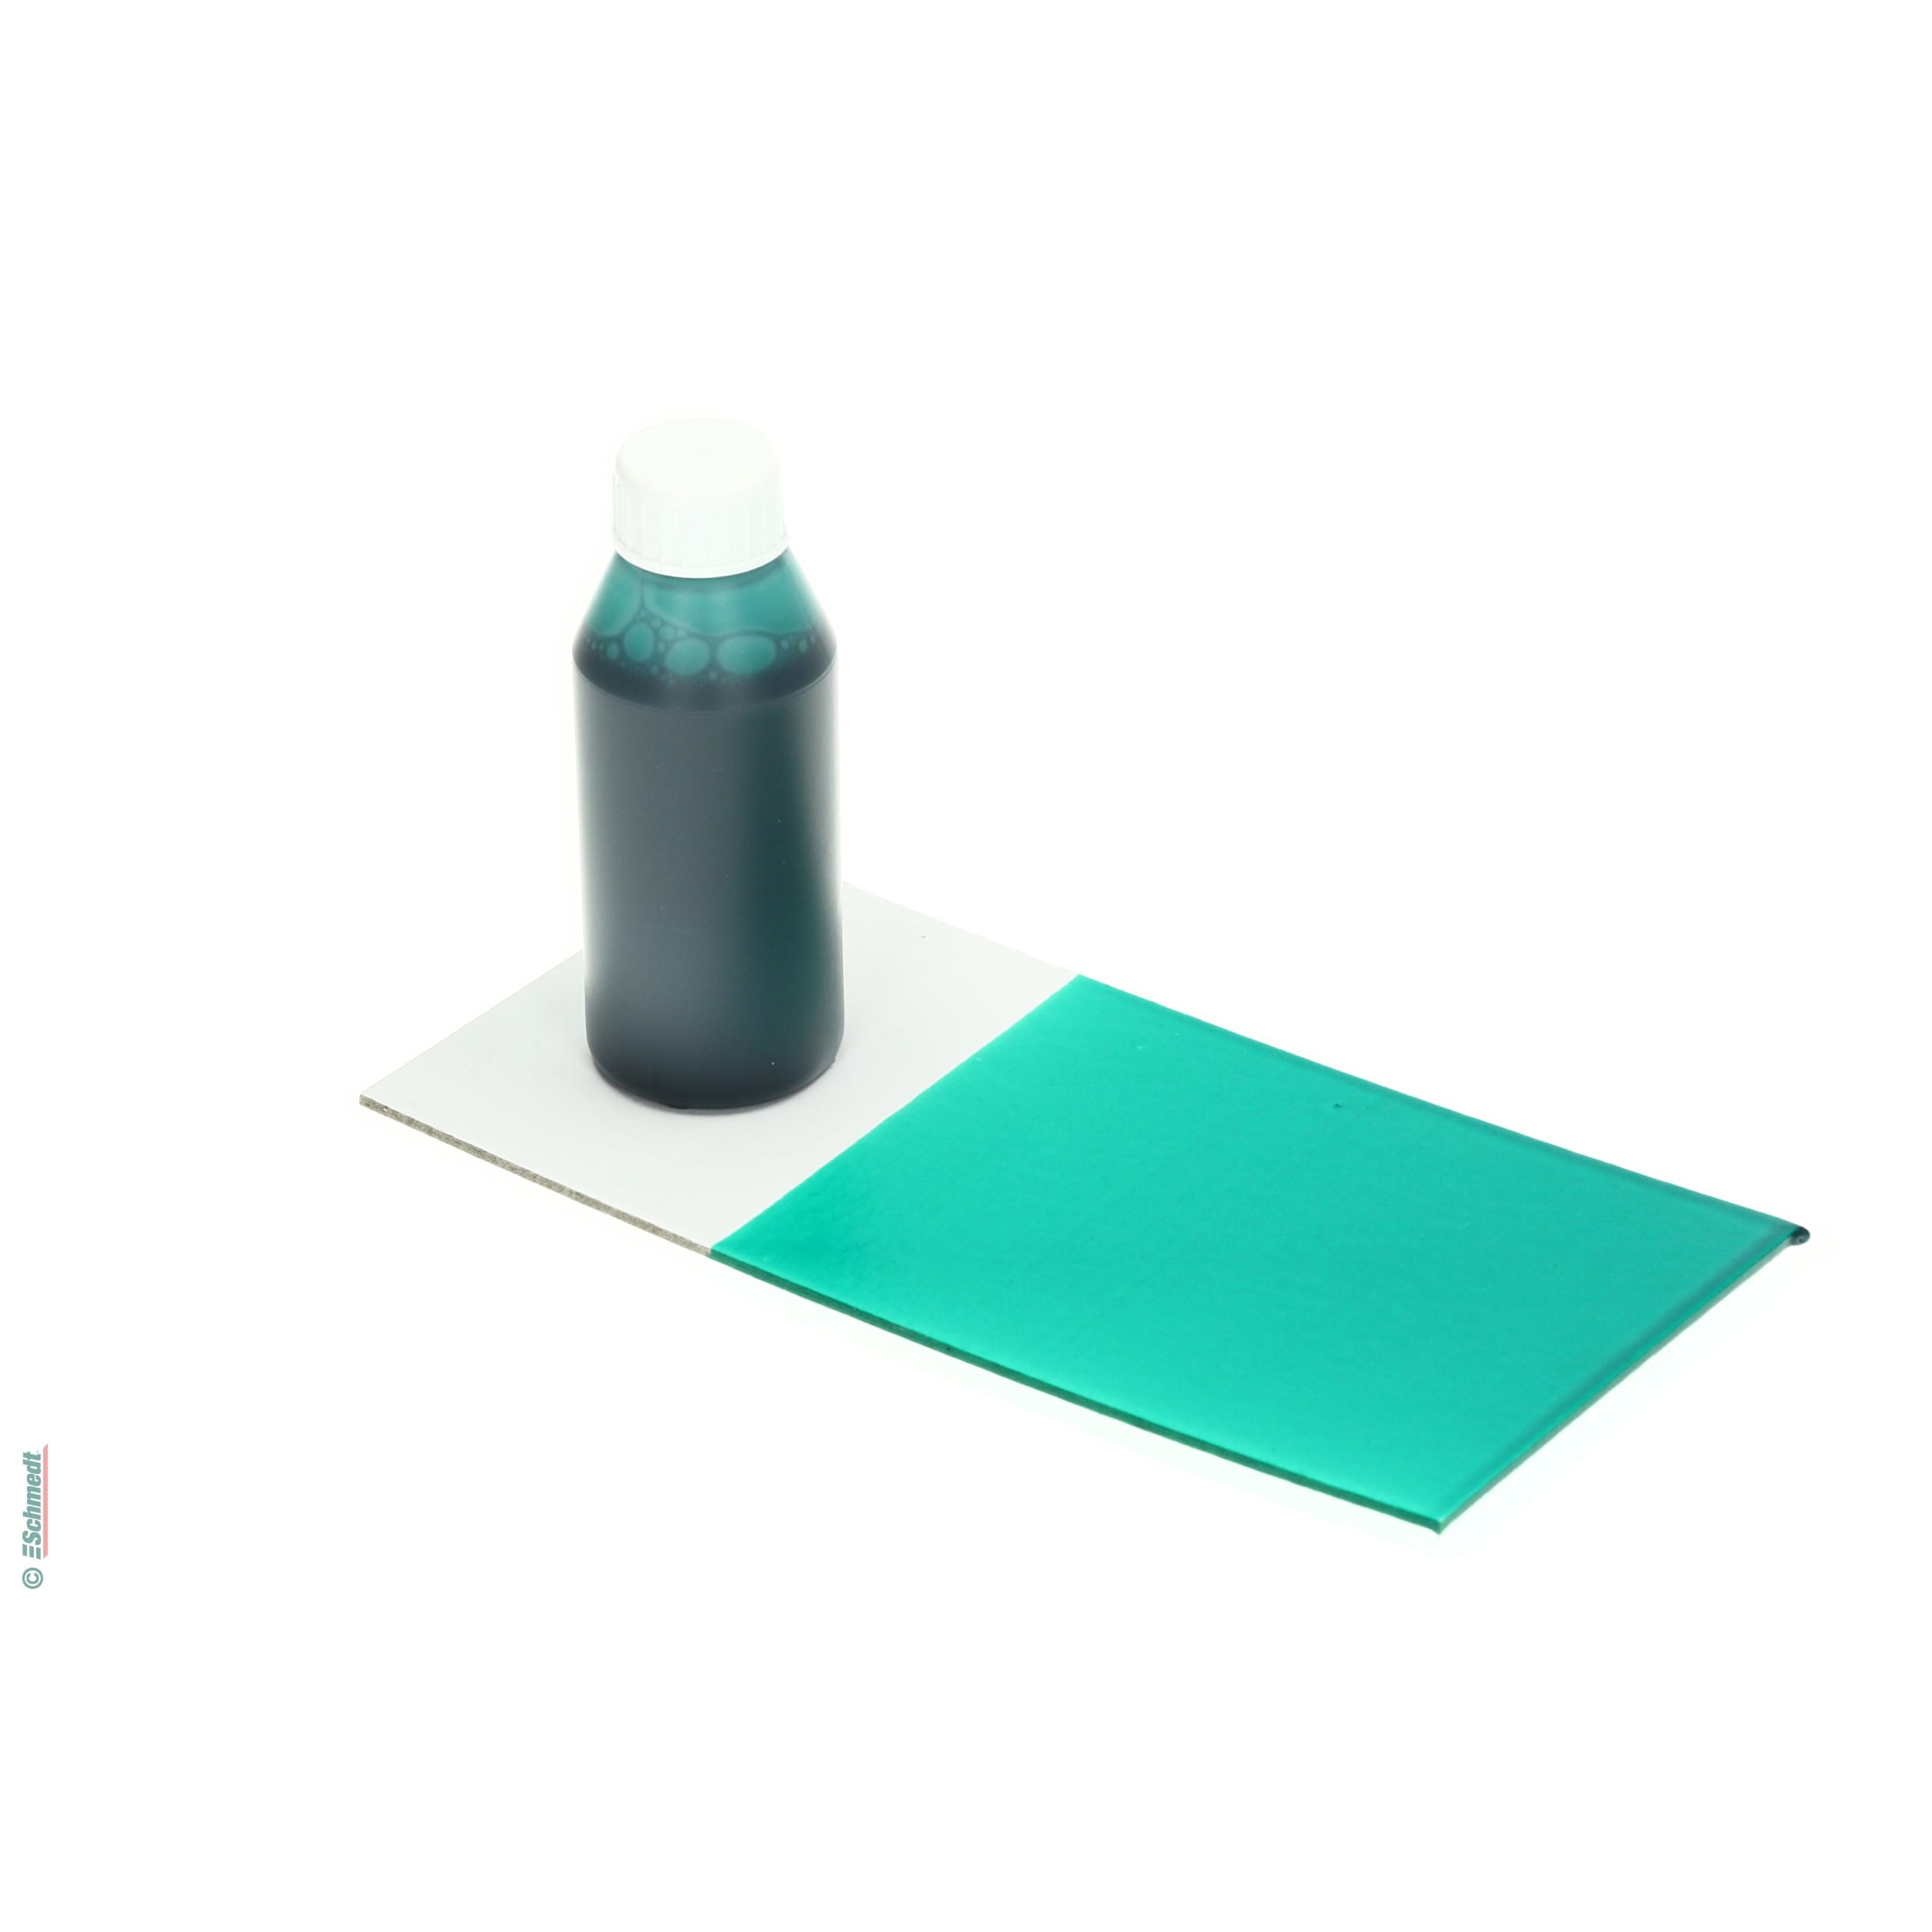 Glue dye - Colour dark green - Contents Bottle / 100 ml - to dye dispersion glues such as pad-binding or perfect-binding glue to bind note p... - image-1